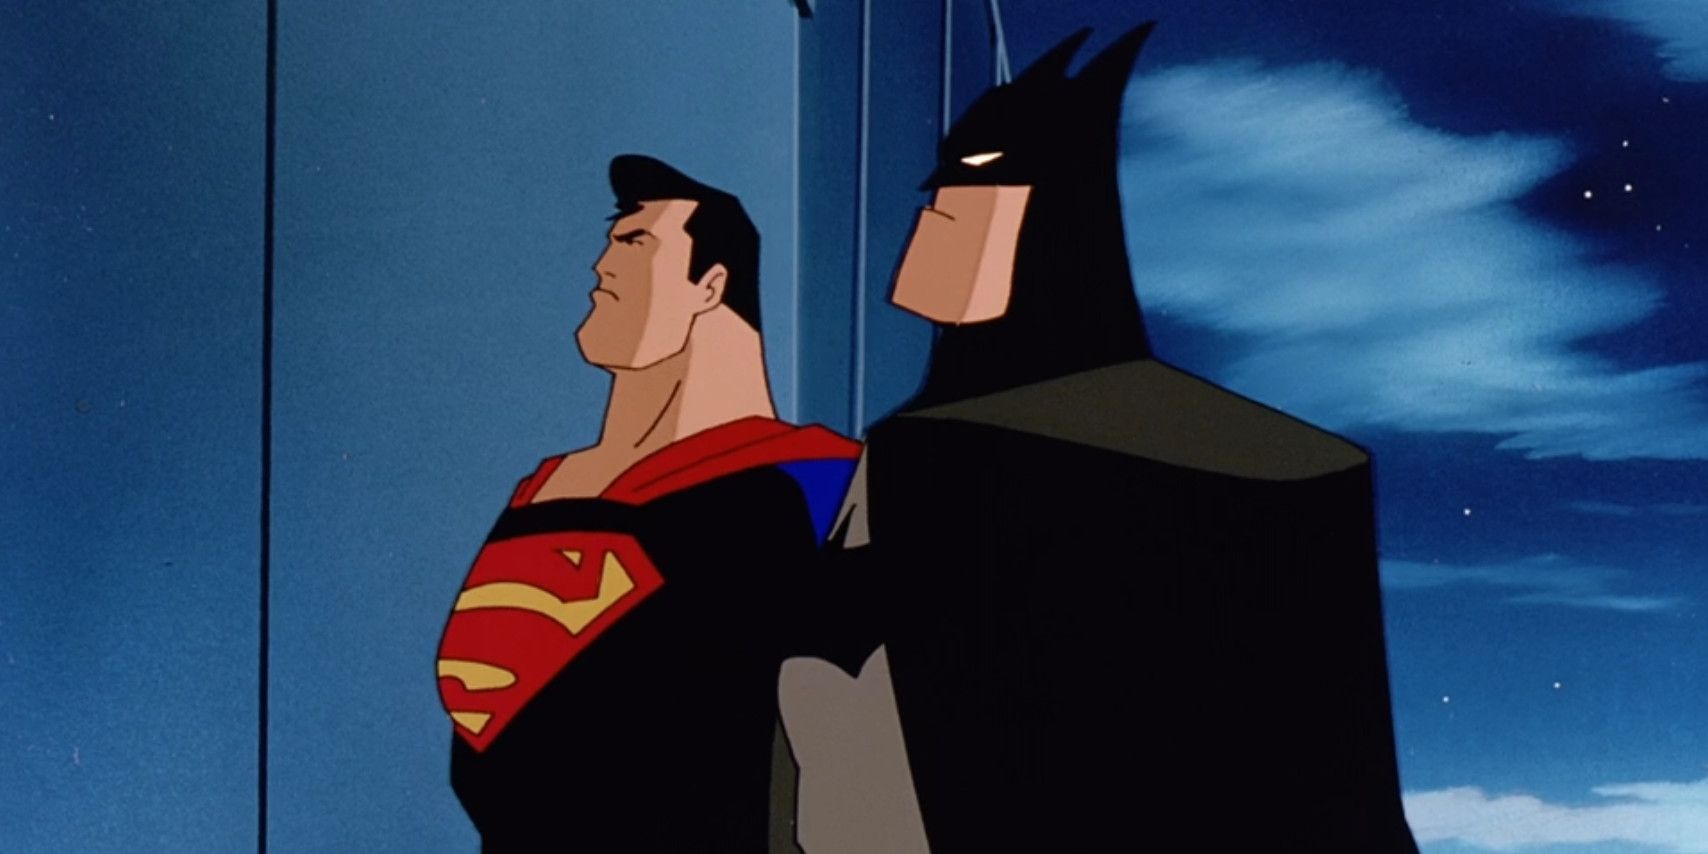 Batman and Superman standing together in World's Finest animated movie.